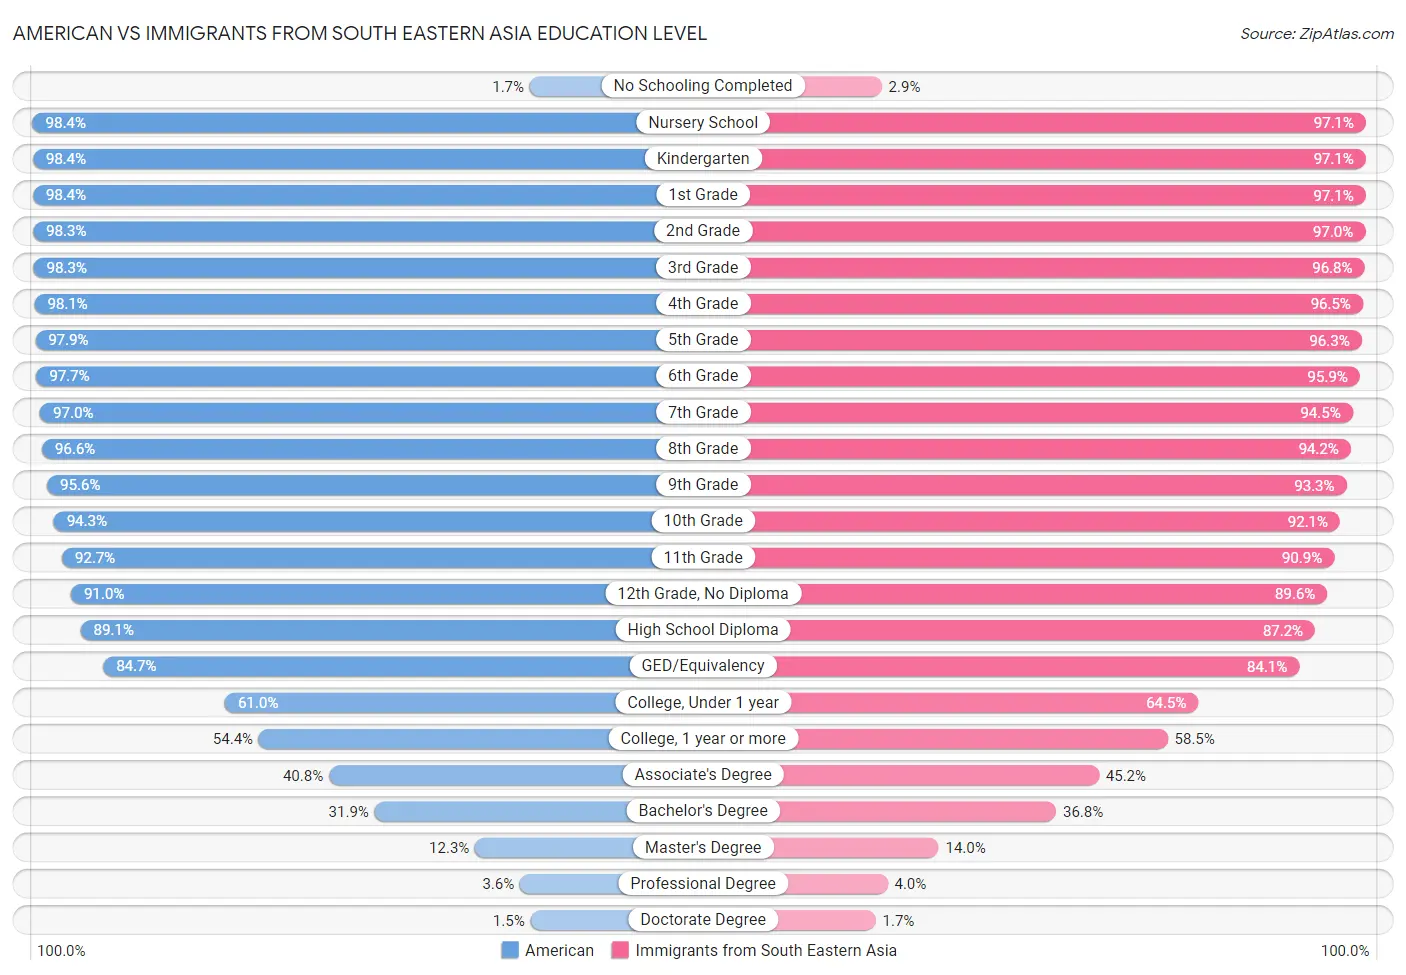 American vs Immigrants from South Eastern Asia Education Level